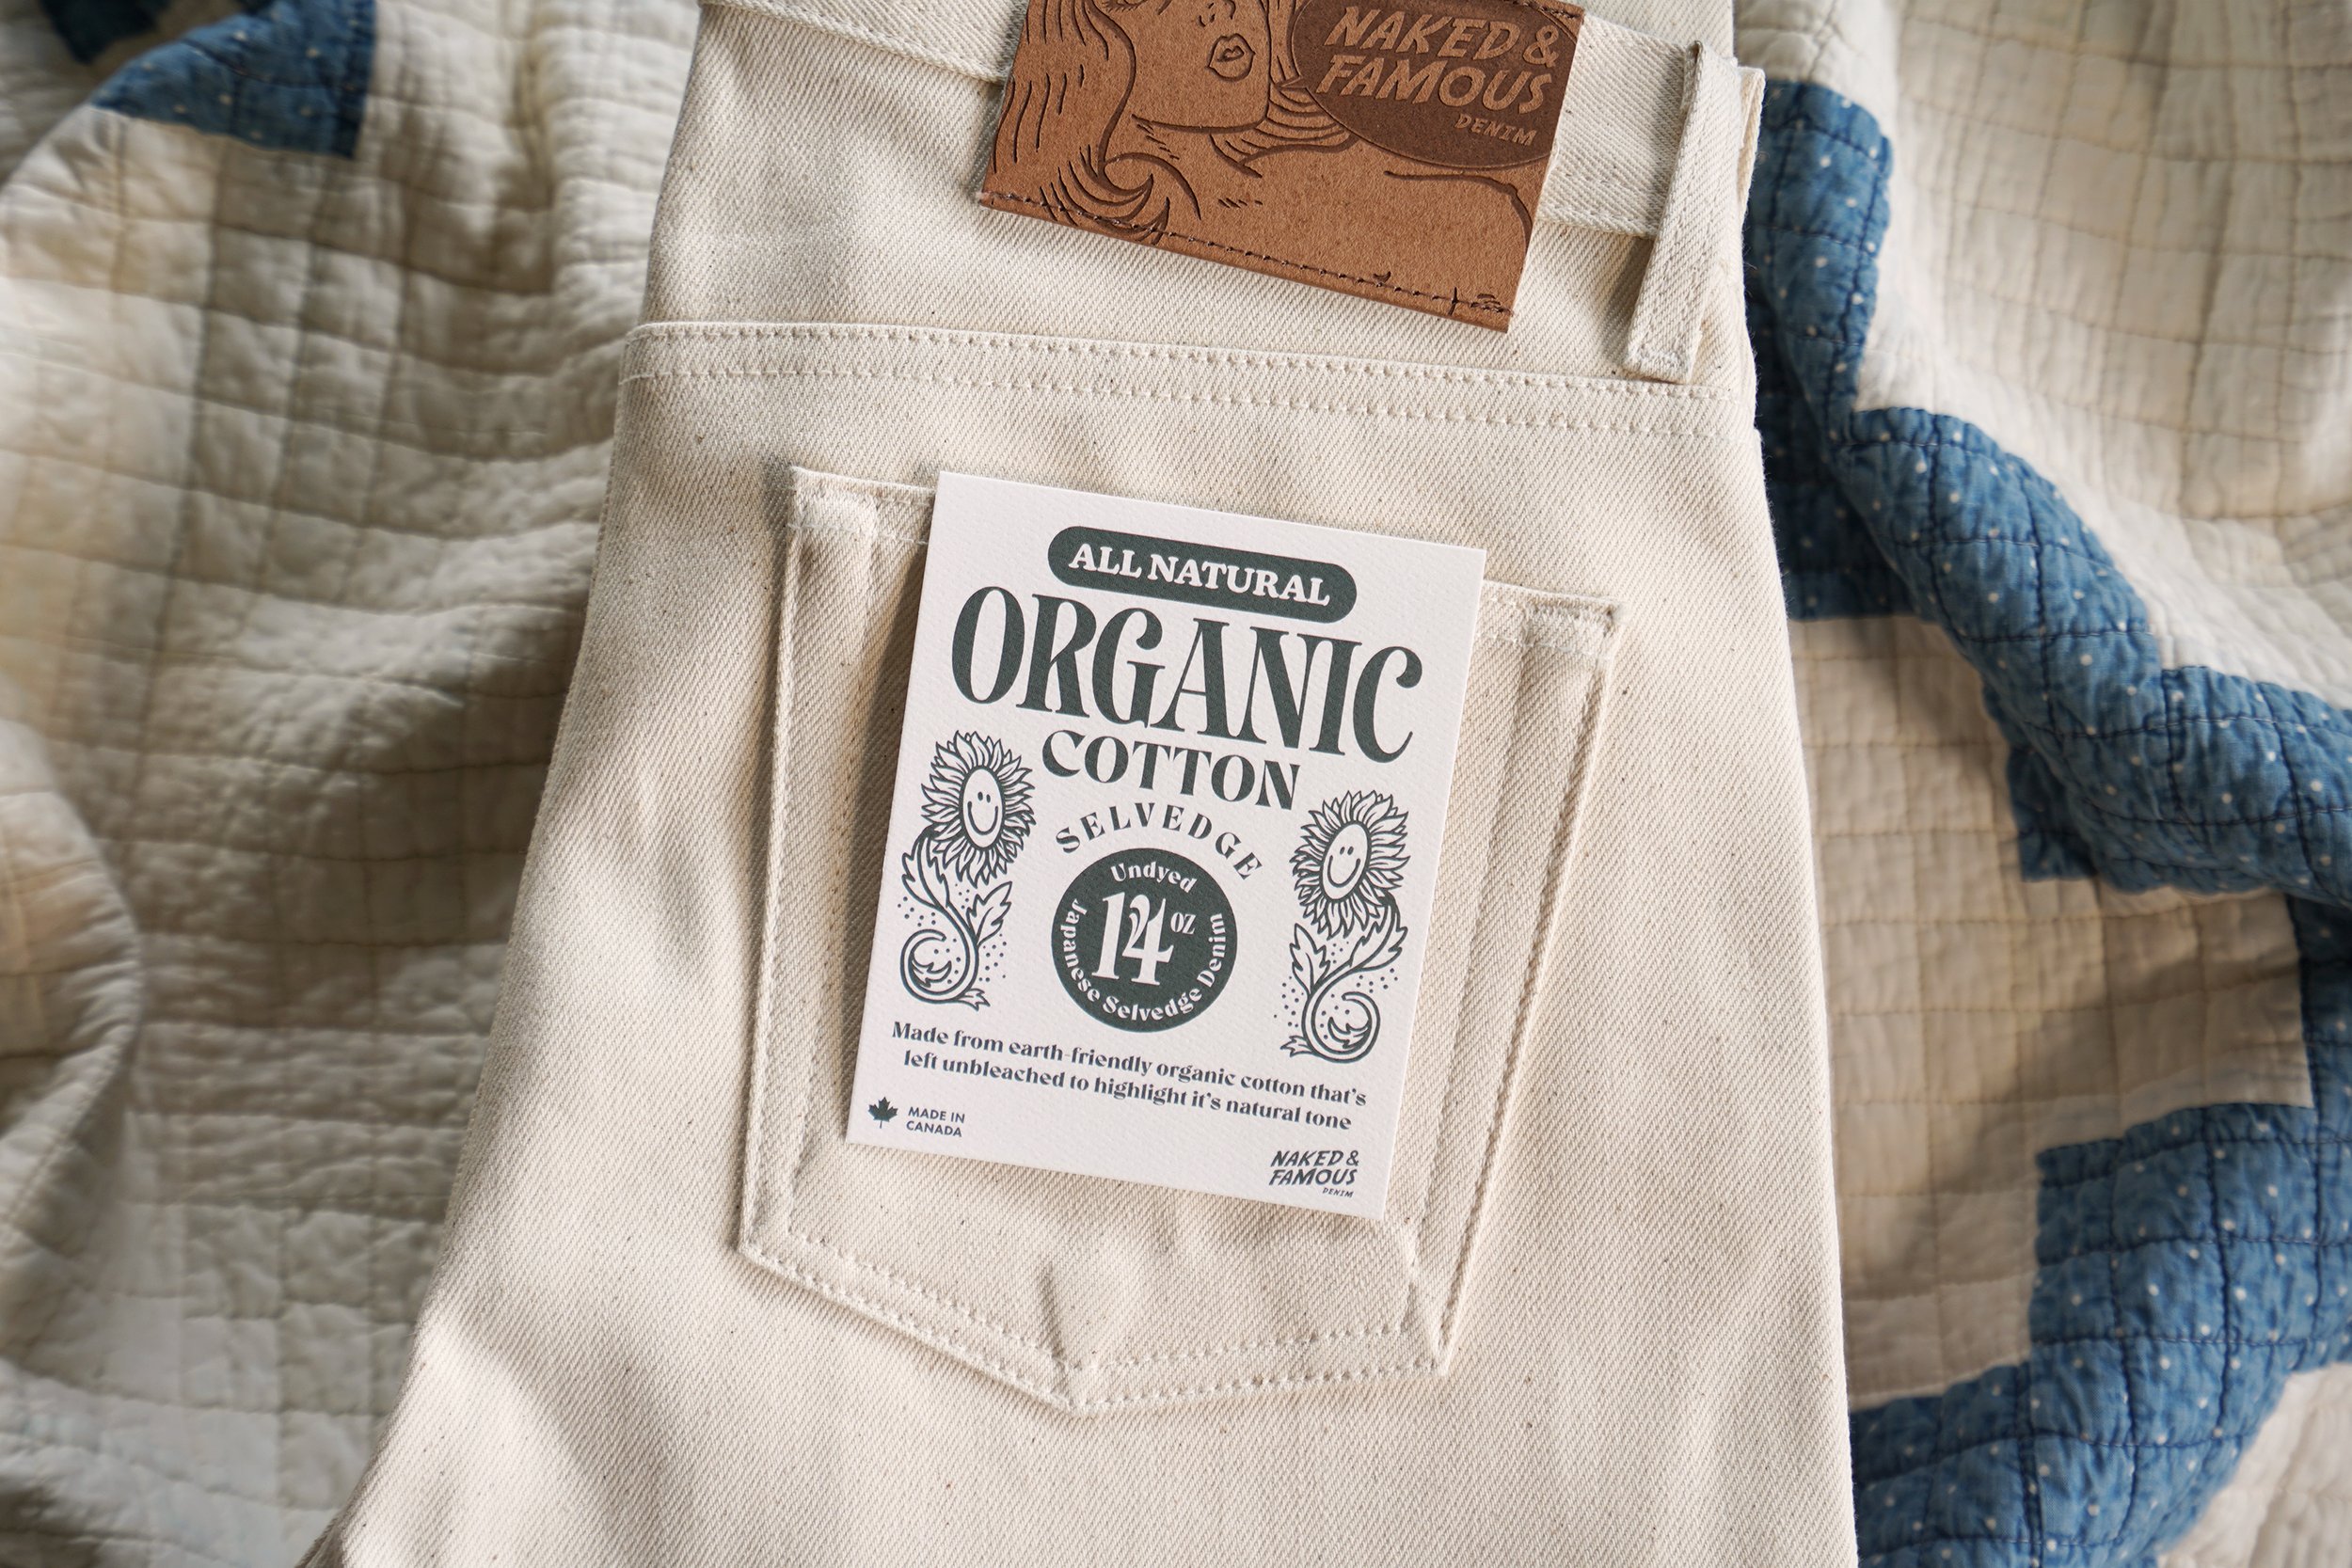 All Natural Organic Cotton Selvedge - Pocket Flasher